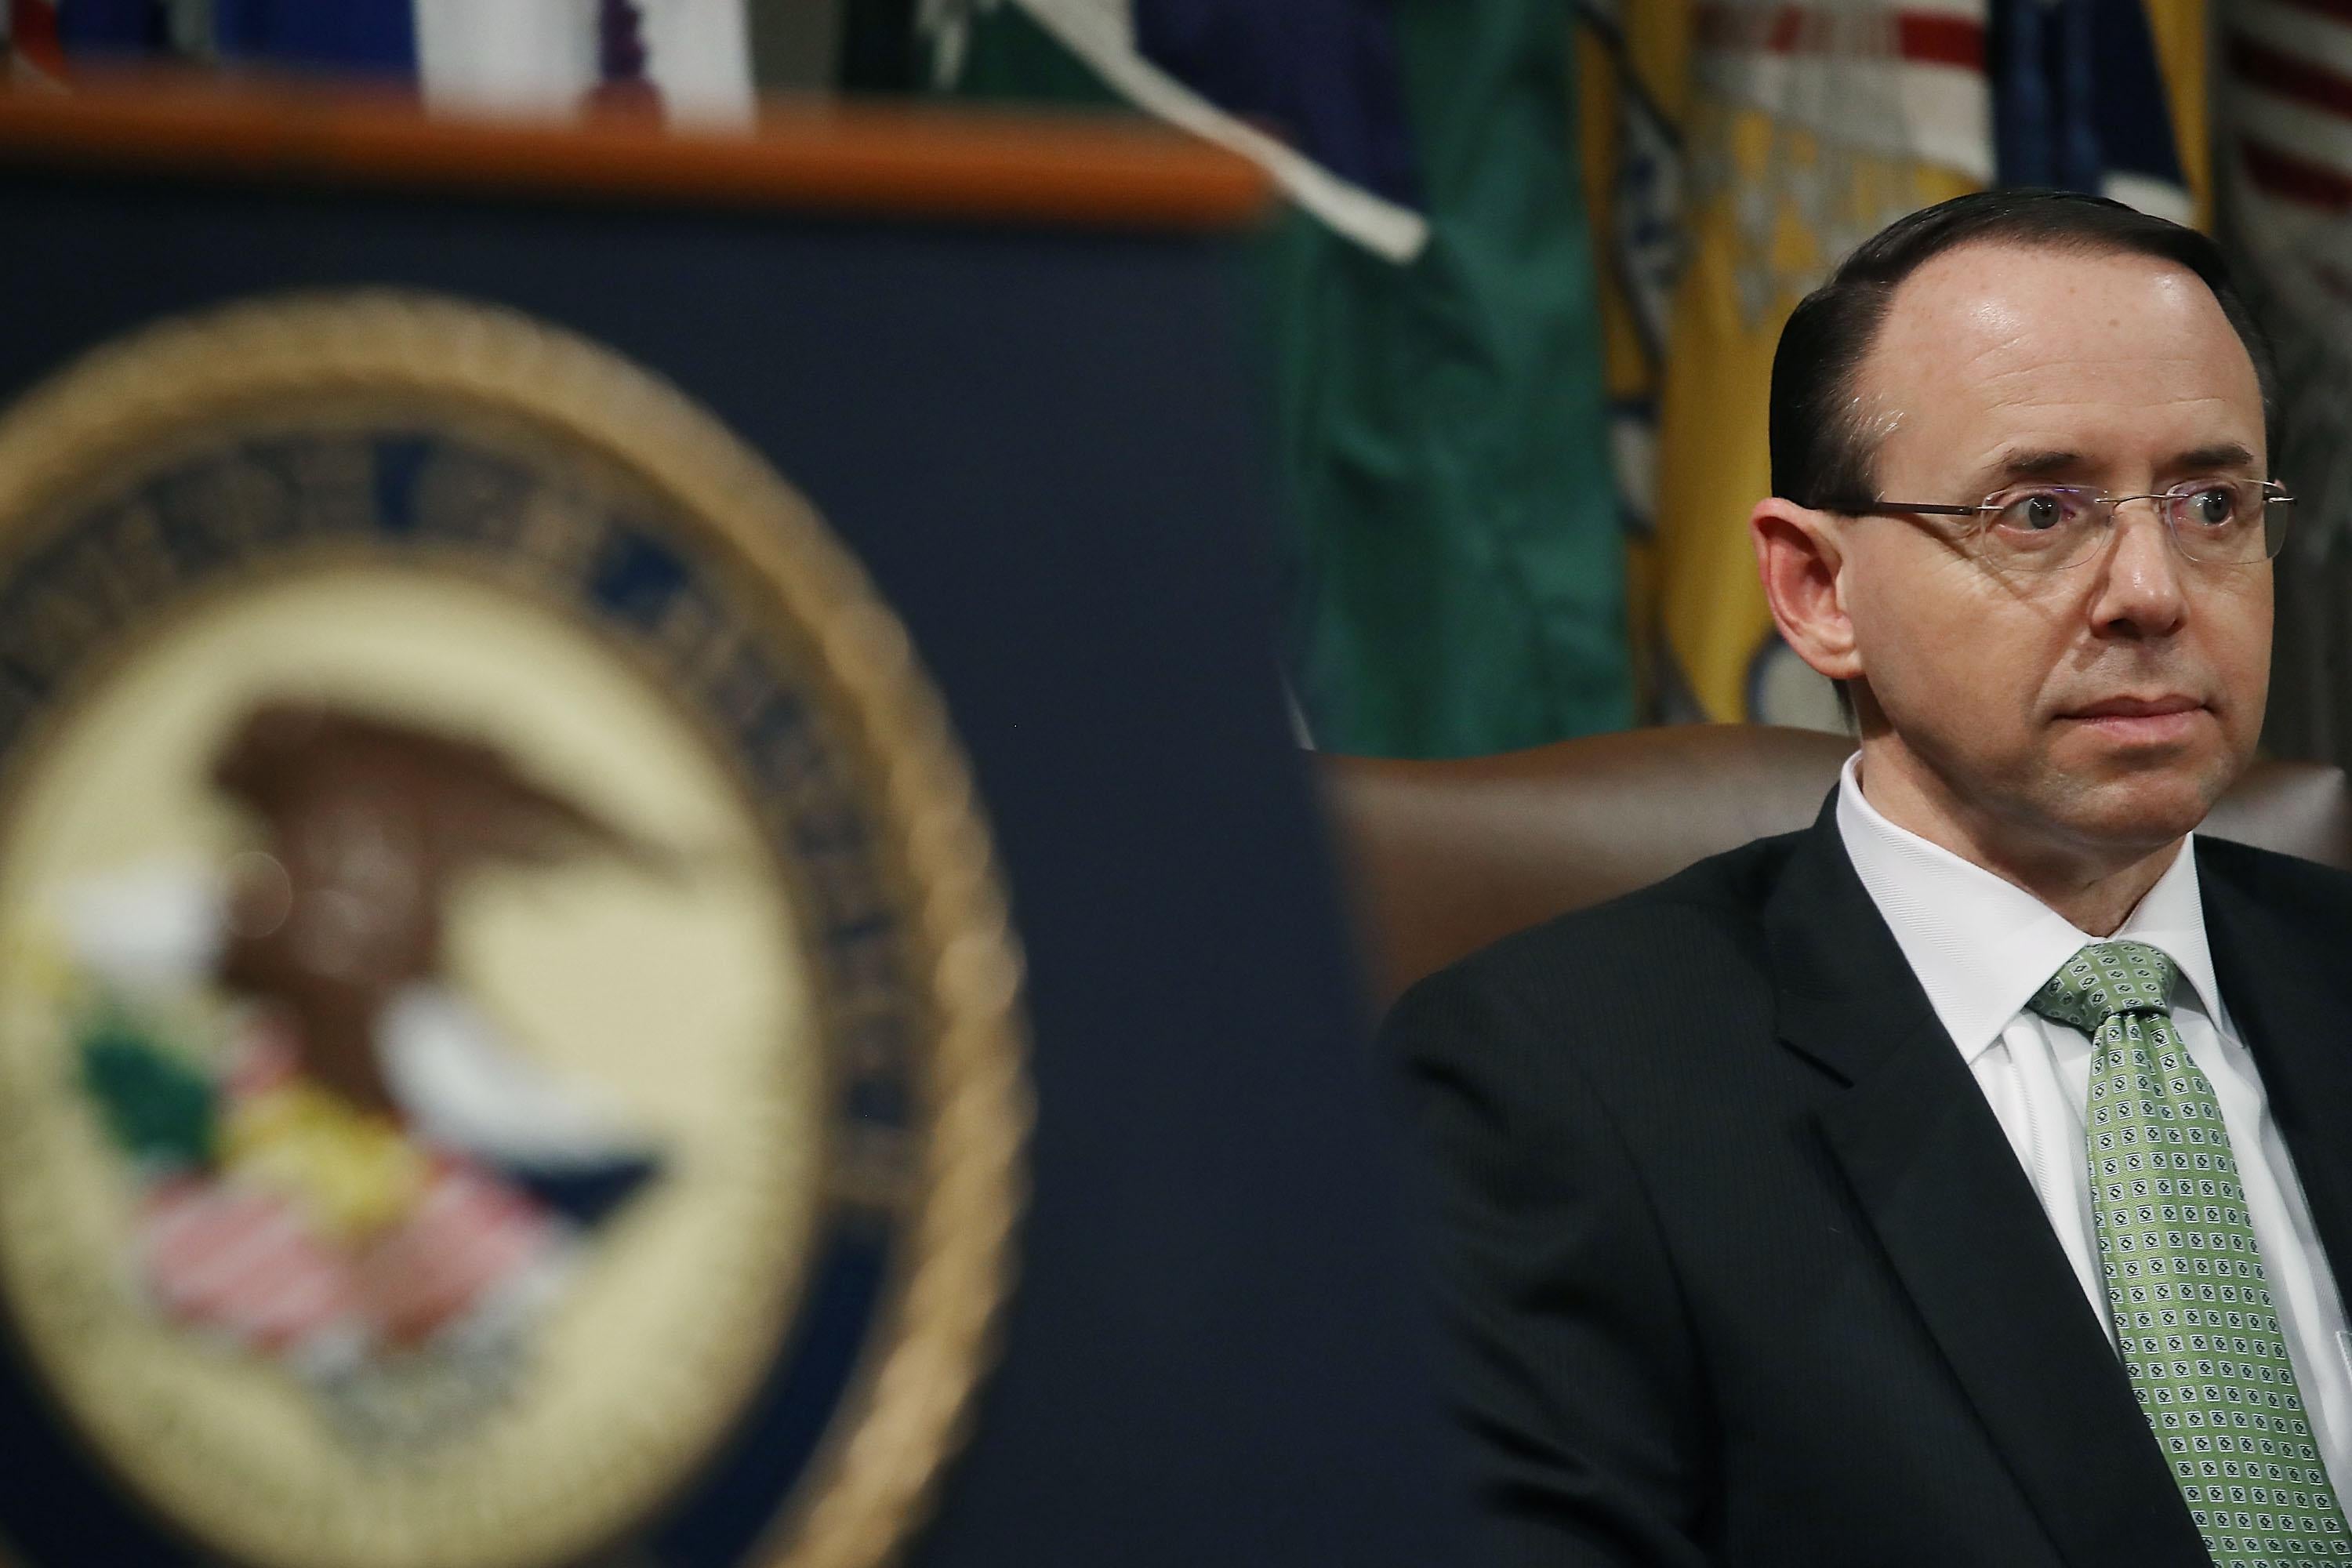 Deputy U.S. Attorney General, Rod Rosenstein participates in a summit to discuss efforts to combat human trafficking, at the Justice Department, on February 2, 2018 in Washington, DC.